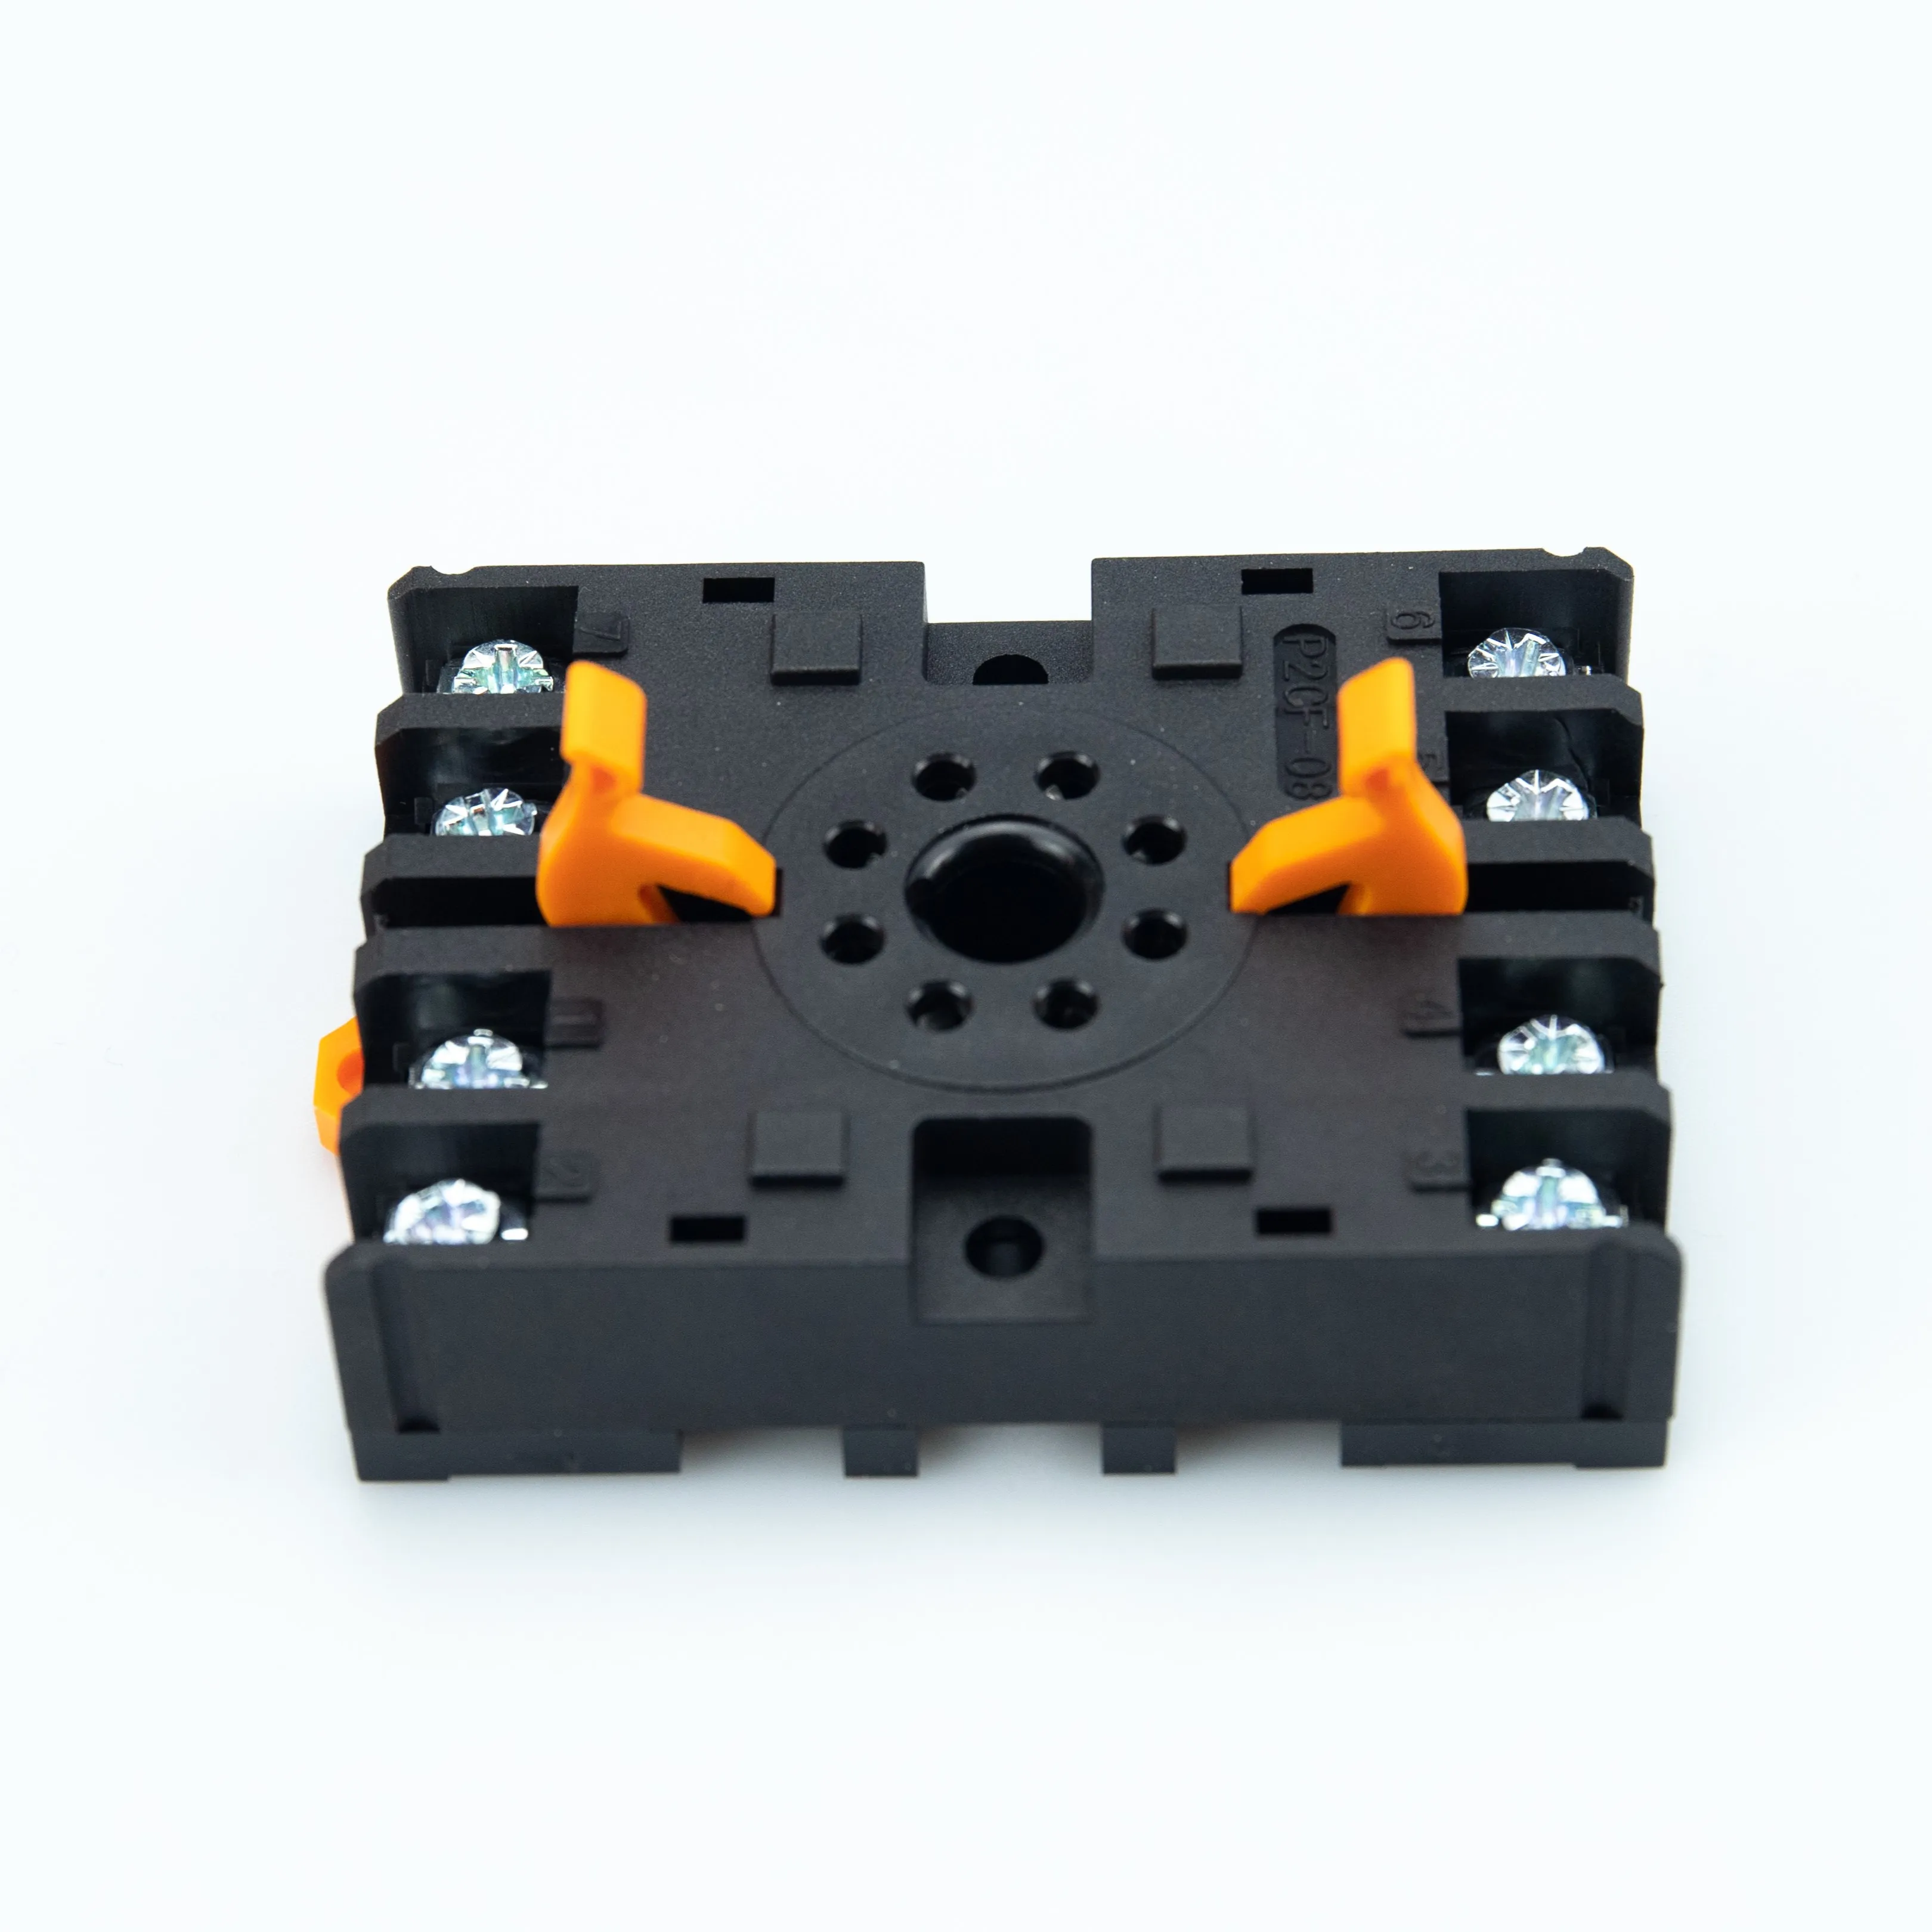 Buy Relays China Trade,Buy China Direct From Buy Relays Factories at  Alibaba.com